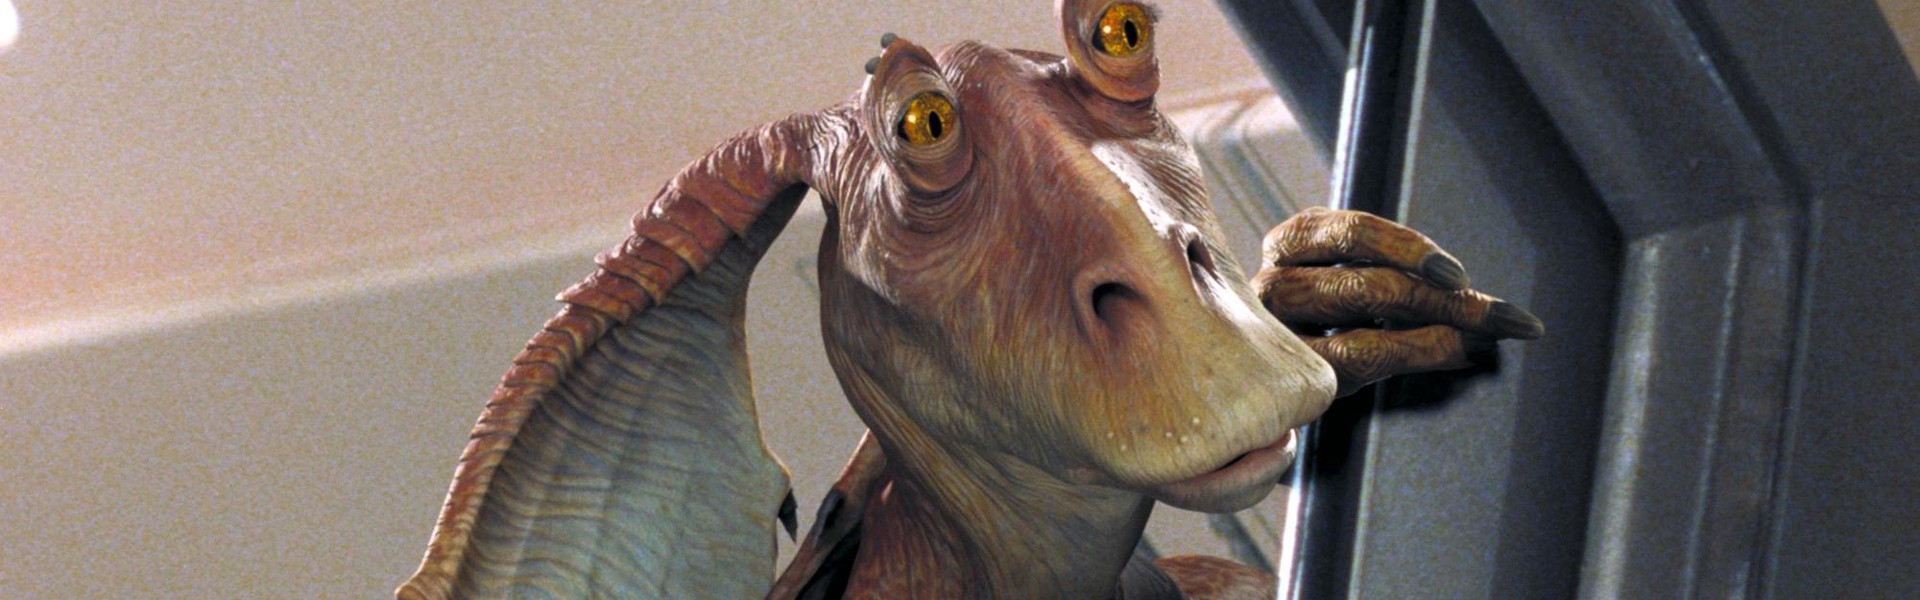 Ahmed Best (on-screen Jar Jar Binks) spoke about the hate. The actor tried to take his own life